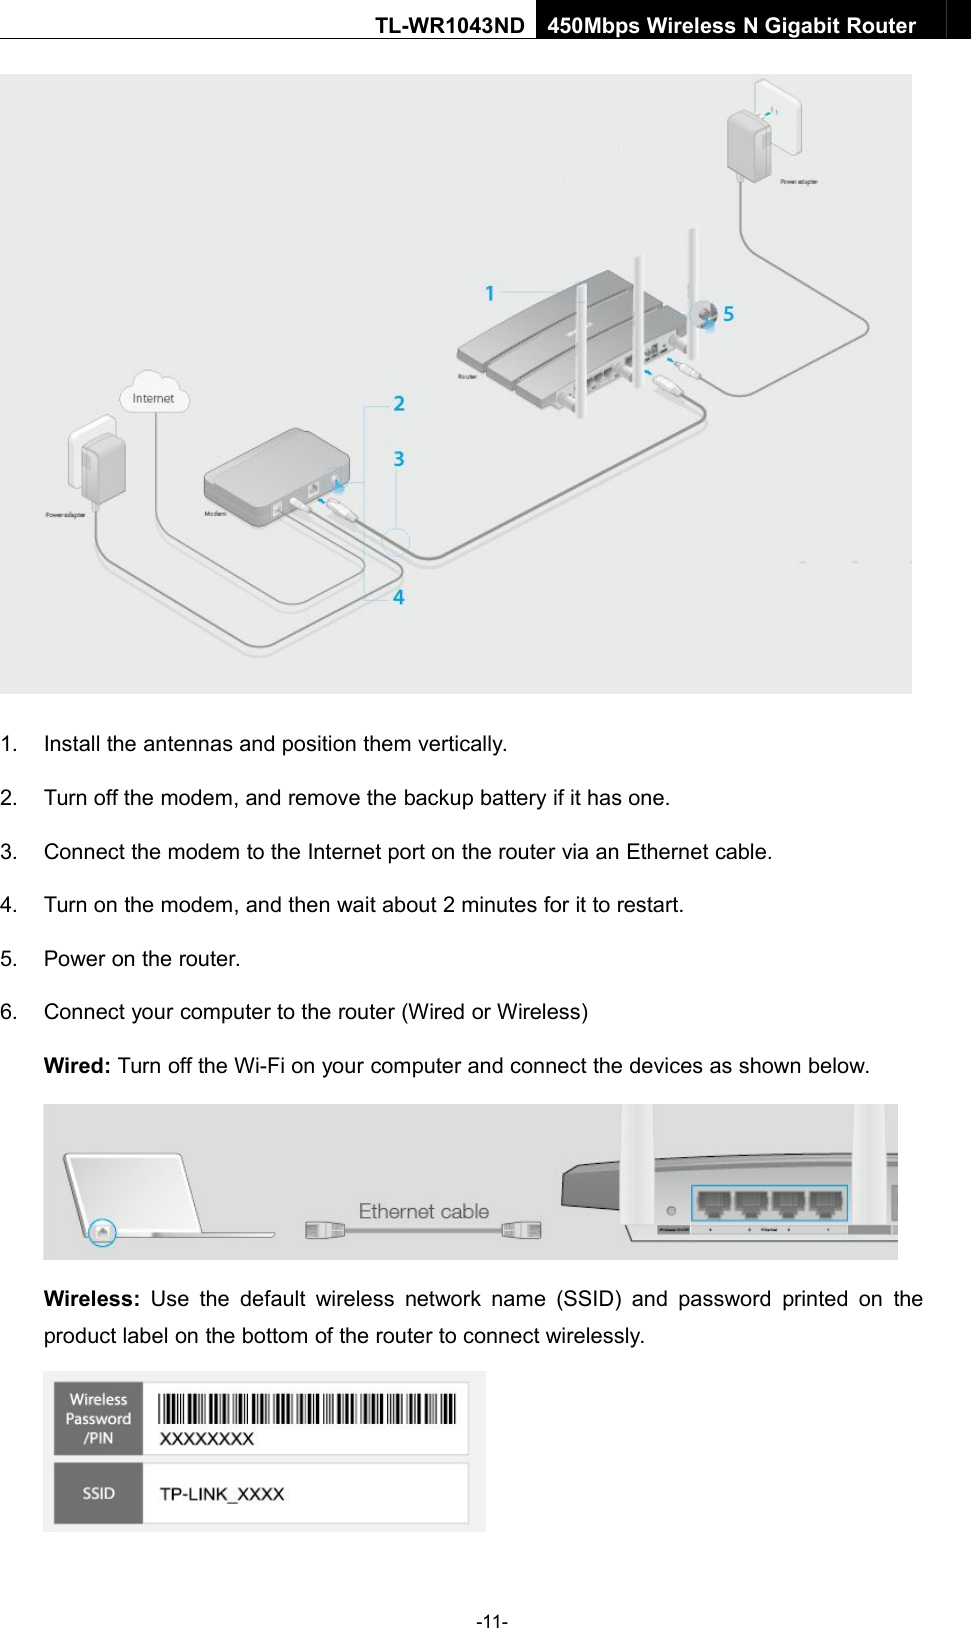 -11-TL-WR1043ND450Mbps Wireless N Gigabit Router1. Install the antennas and position them vertically.2. Turn off the modem, and remove the backup battery if it has one.3. Connect the modem to the Internet port on the router via an Ethernet cable.4. Turn on the modem, and then wait about 2 minutes for it to restart.5. Power on the router.6. Connect your computer to the router (Wired or Wireless)Wired: Turn off the Wi-Fi on your computer and connect the devices as shown below.Wireless: Use the default wireless network name (SSID) and password printed on theproduct label on the bottom of the router to connect wirelessly.